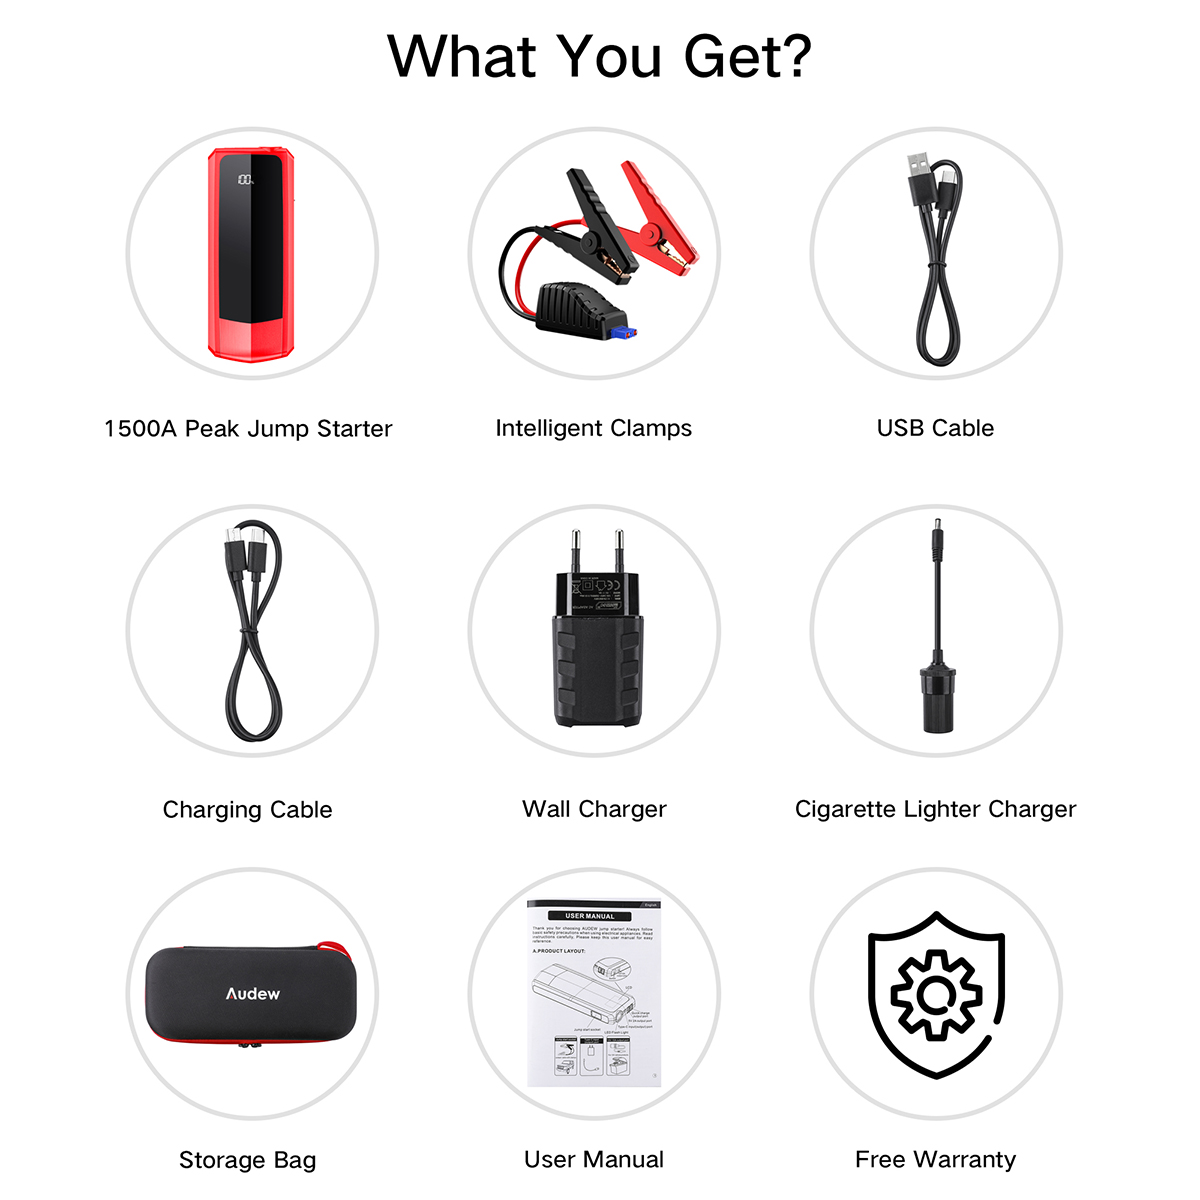 https://www.audew.com/Audew-2000A-Peak-20000mAh-Car-Jump-Starter-for-Any-Gas-Engine-or-Up-To-8_5L-Diesel-Engine-with-LCD-Power-Display-p-100058.html